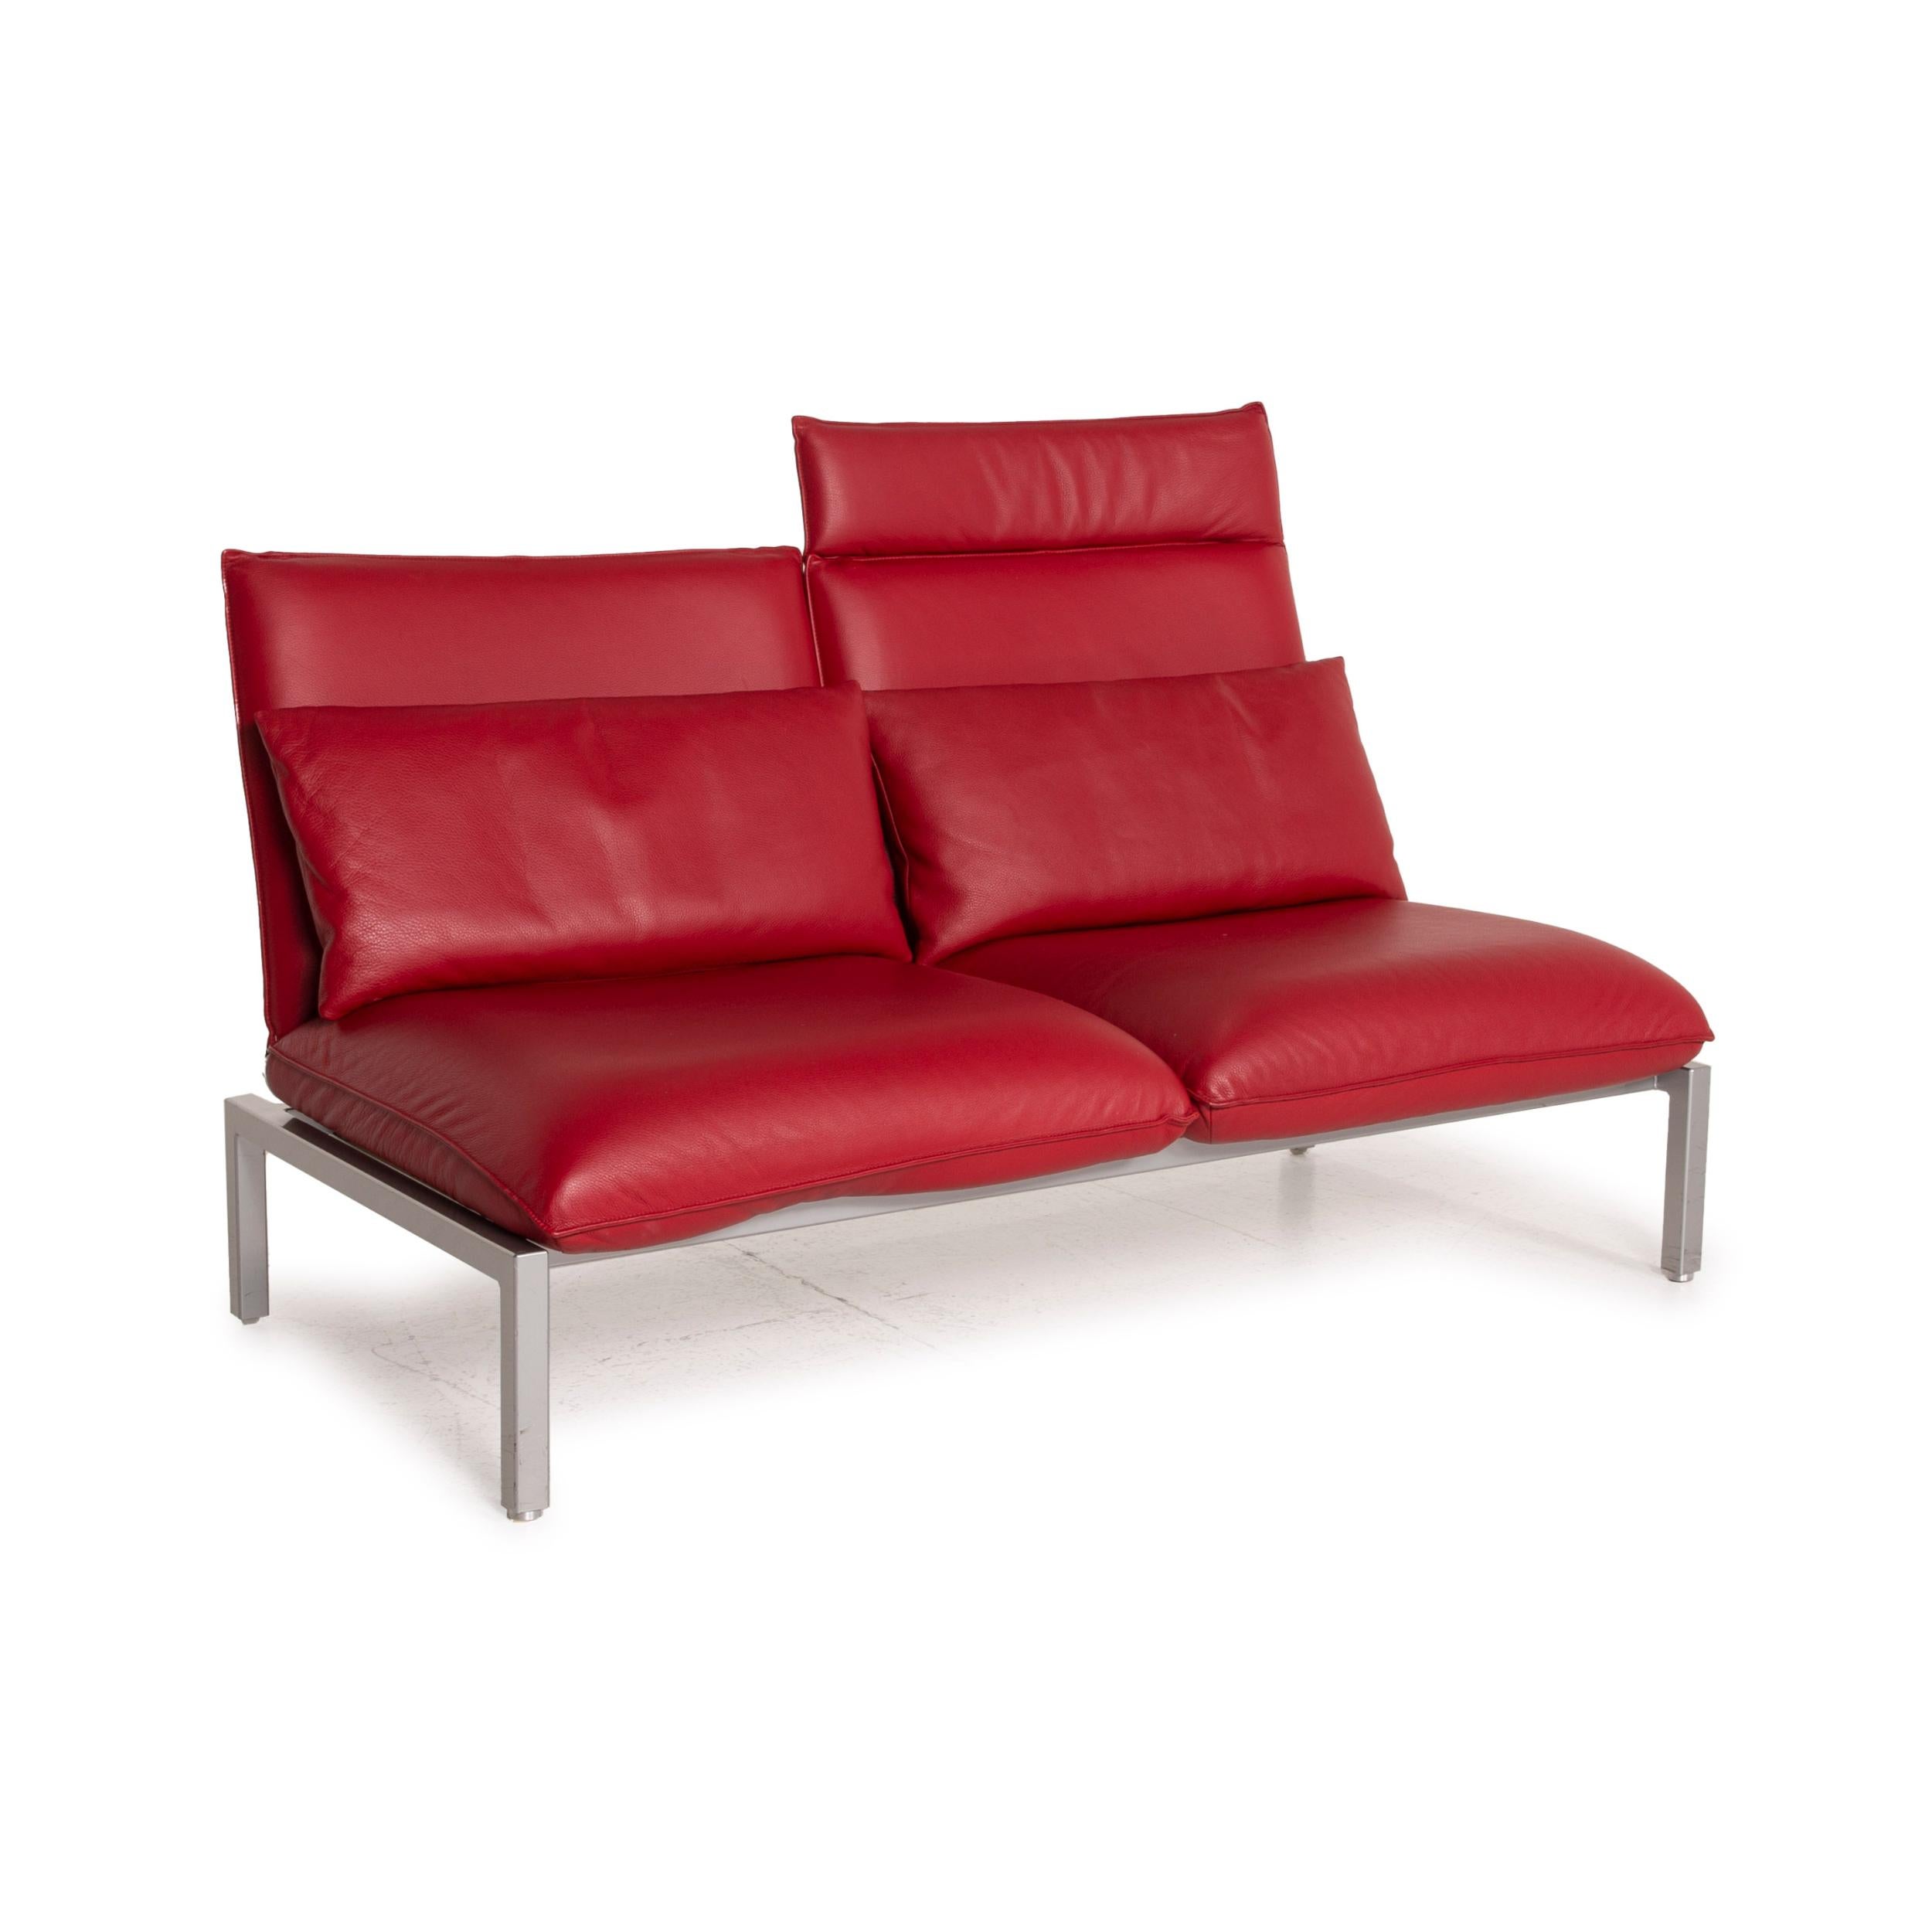 Brühl & Sippold Roro Leather Sofa Two-Seater Reclining Function Relaxation 2